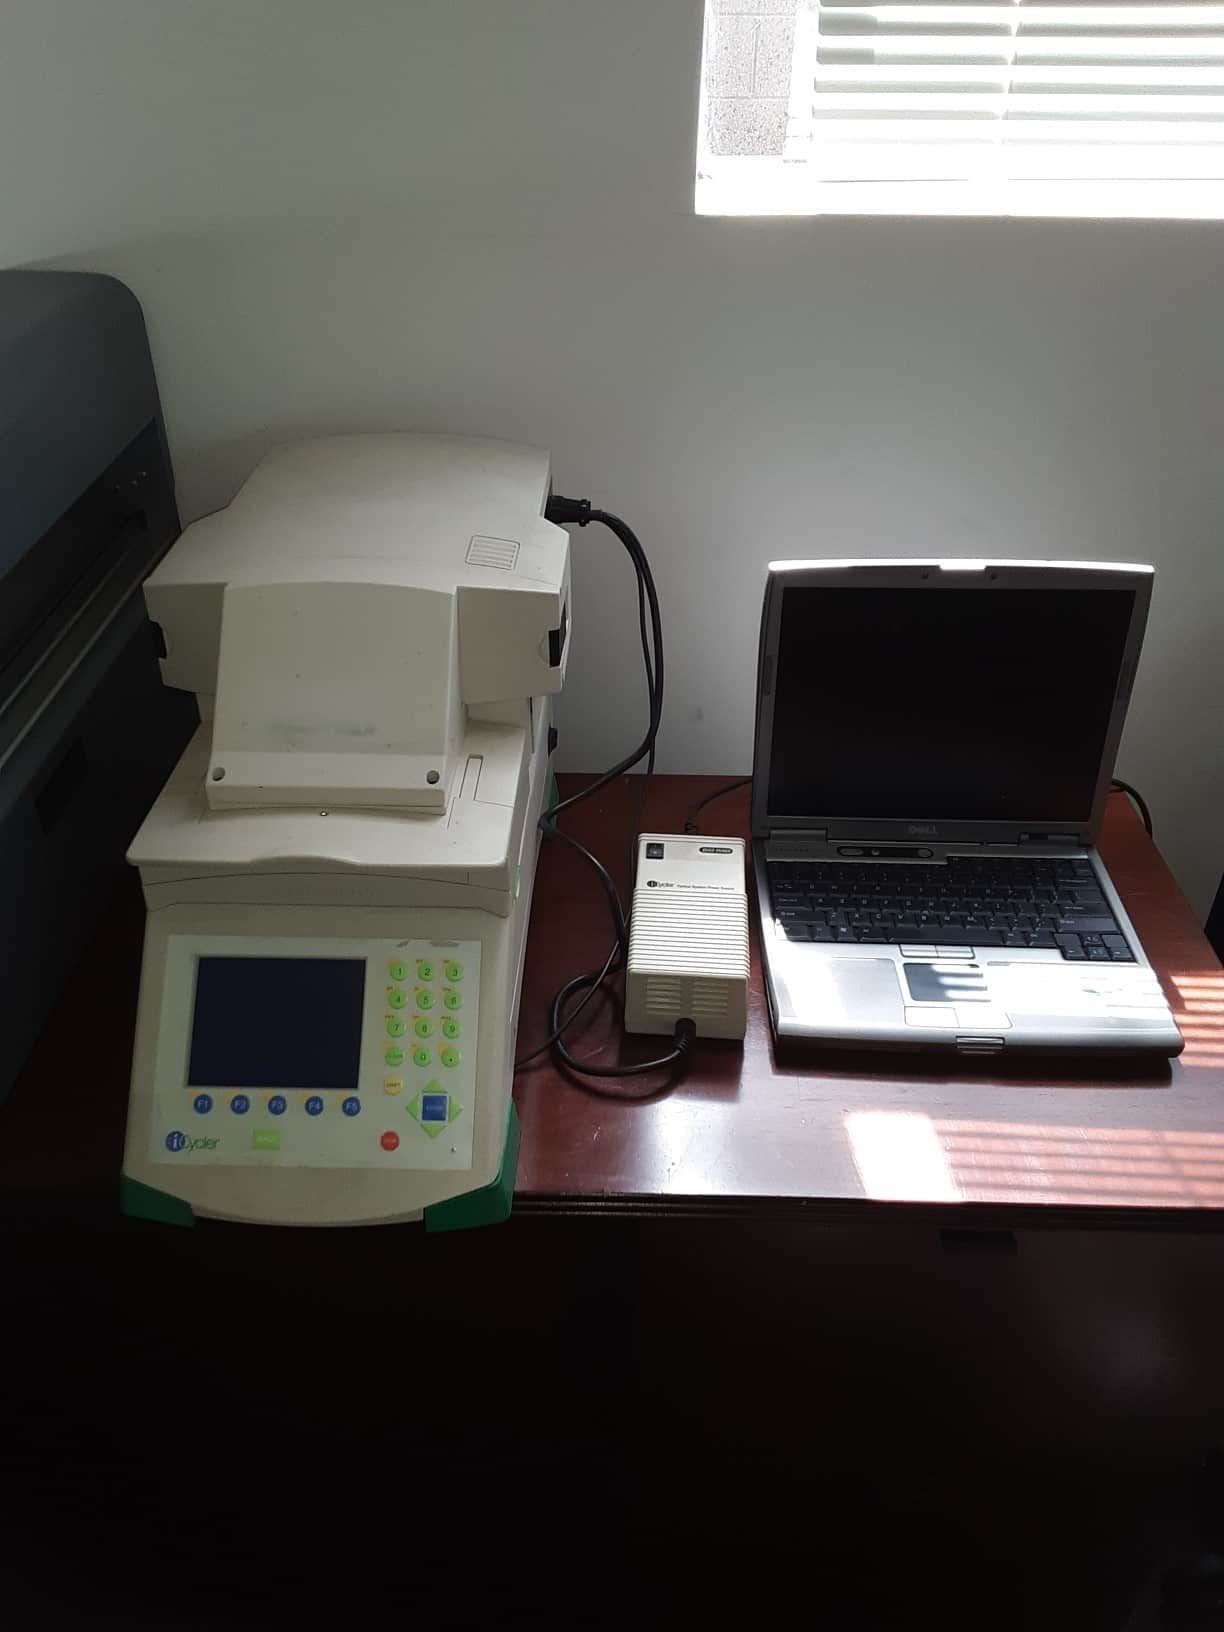 Biorad iCycler real time PCR with iCycler optical module head and software preloaded on computer